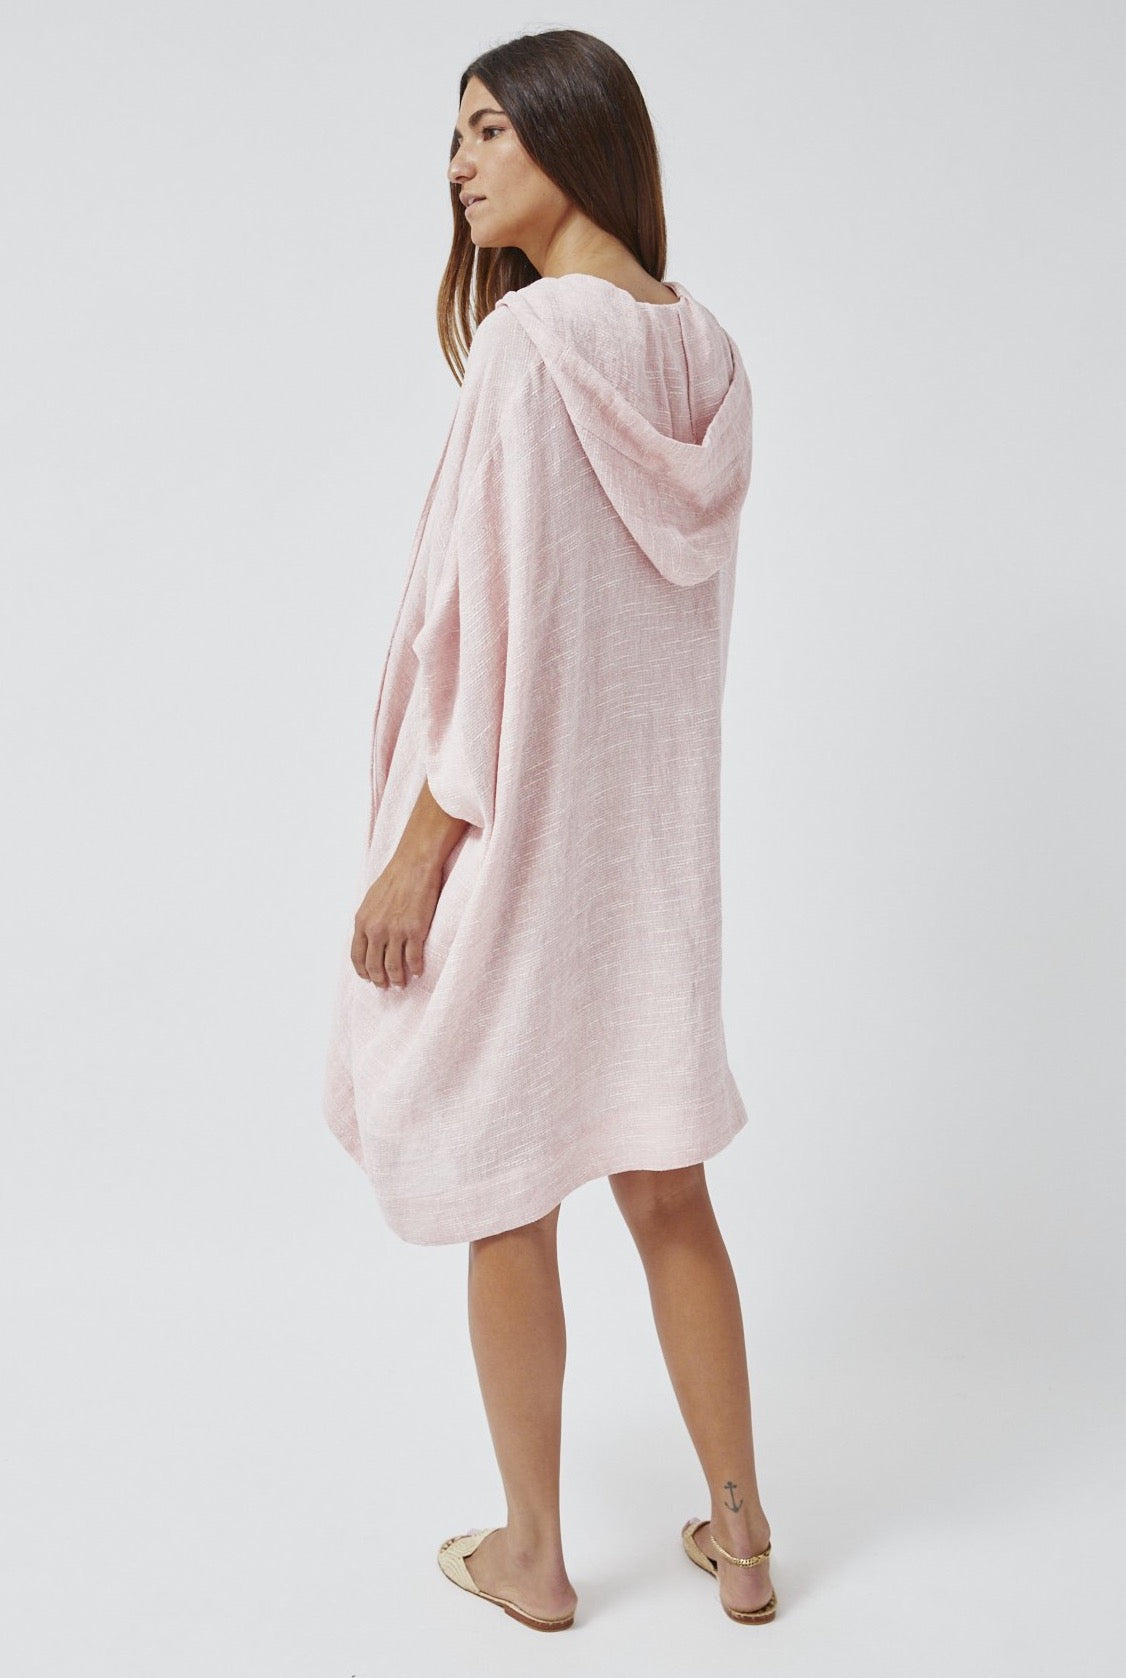 HOODED PALE PINK STRIPED GAUZE PONCHO